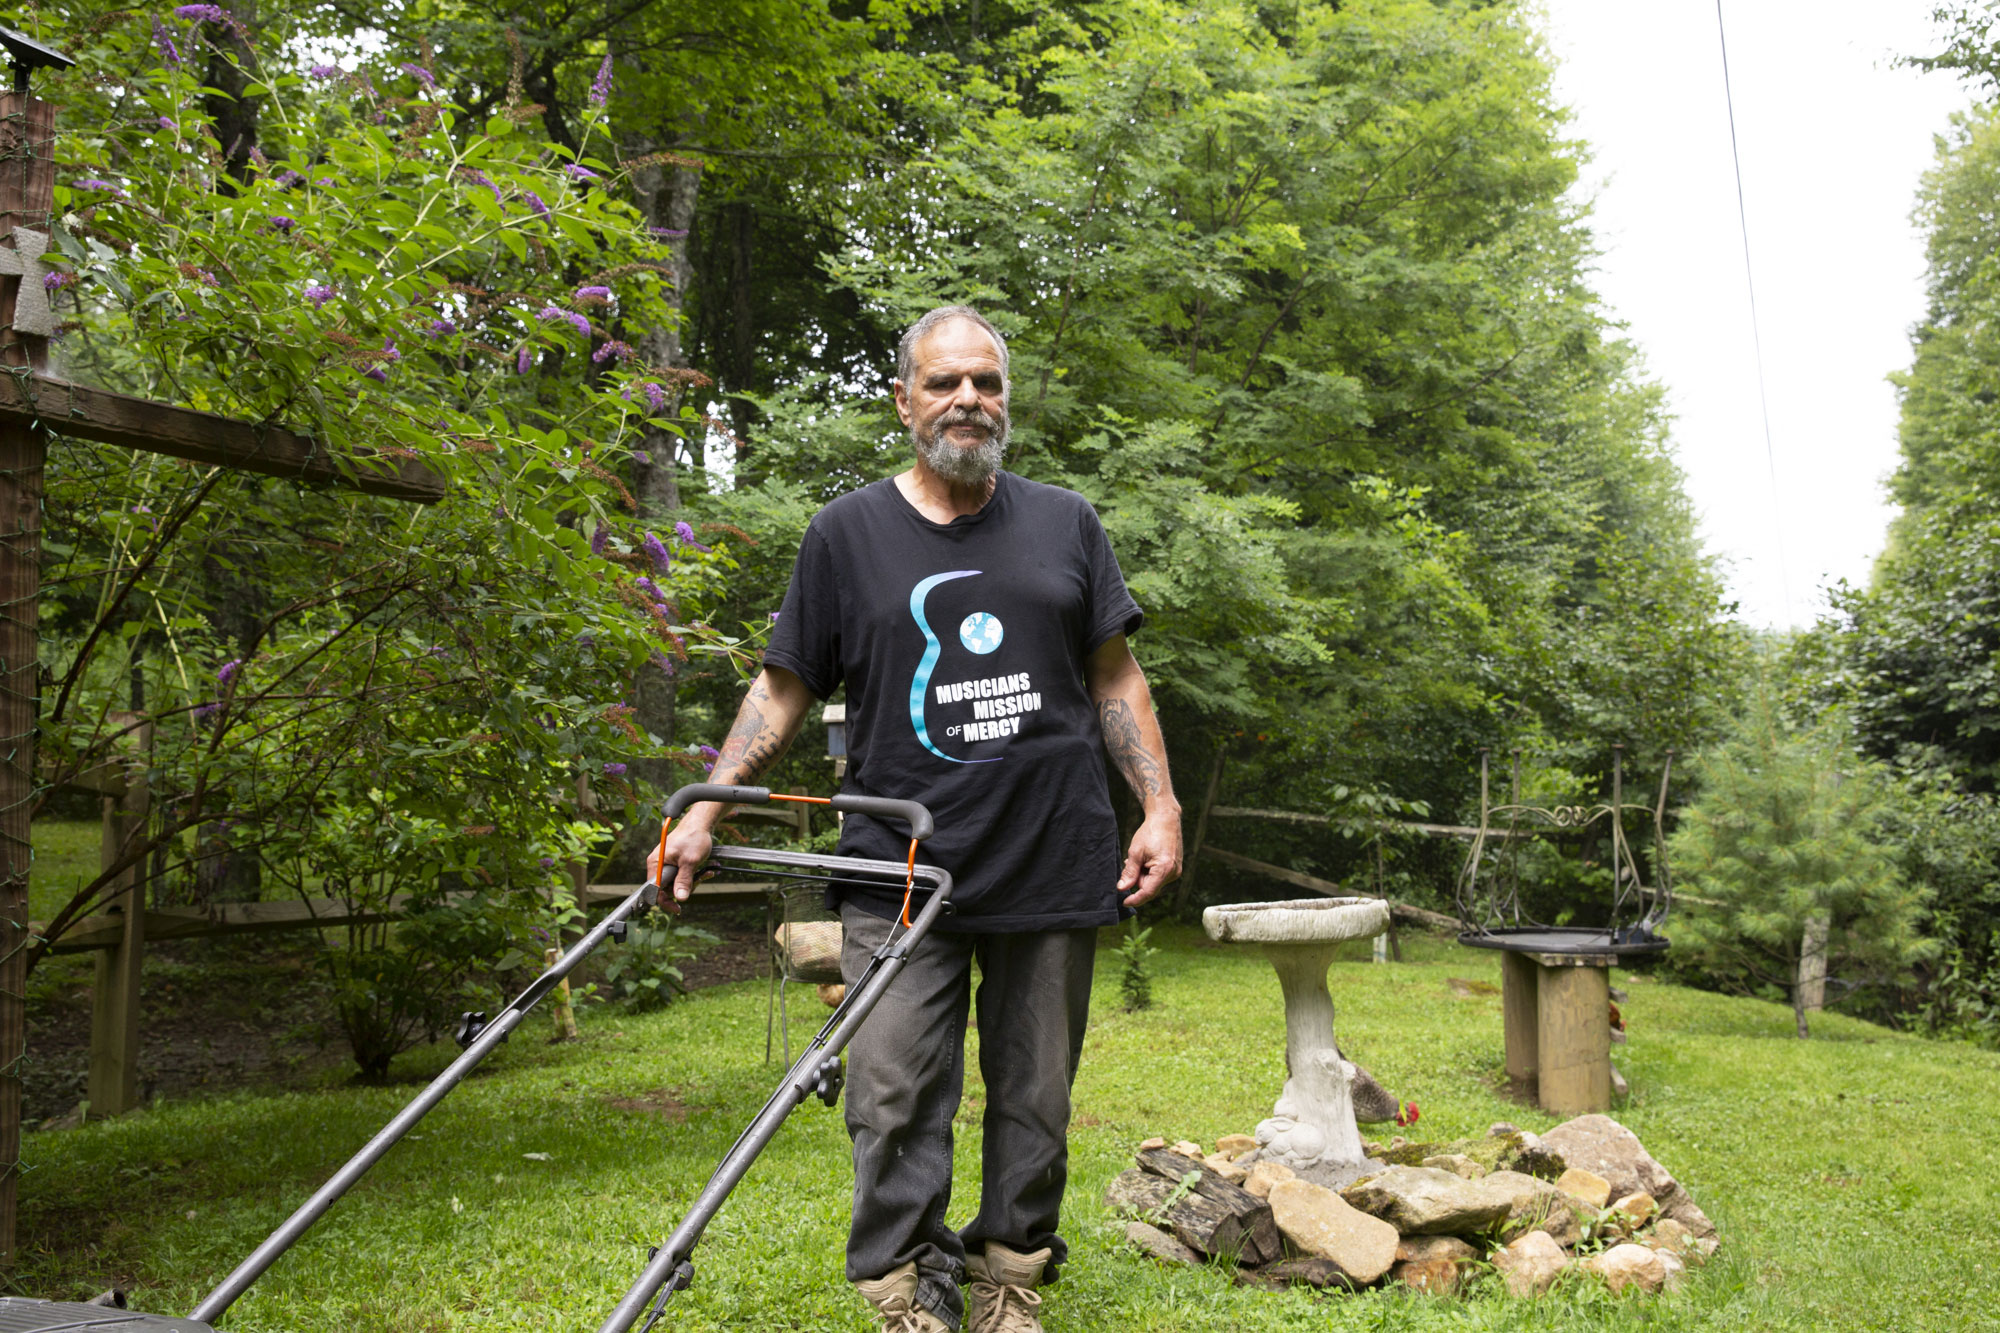 Gray haired man stands next to his lawnmower in a garden